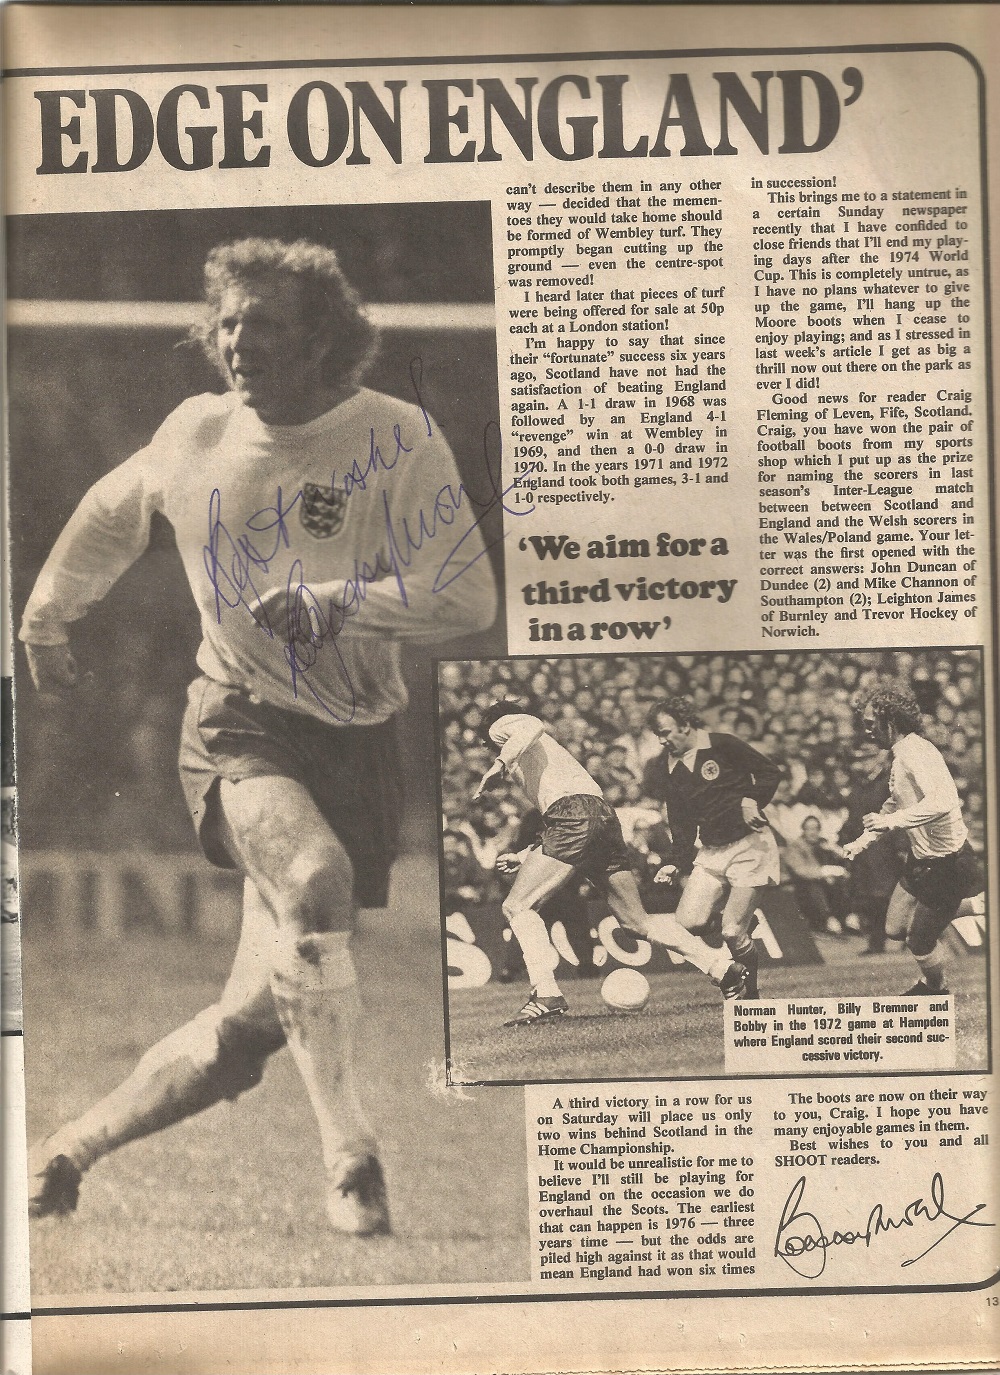 BOBBY MOORE 1941 1993 signed Twice in 1973 Shoot Magazine also signed by Gordon Banks 1937 2019, - Image 3 of 3